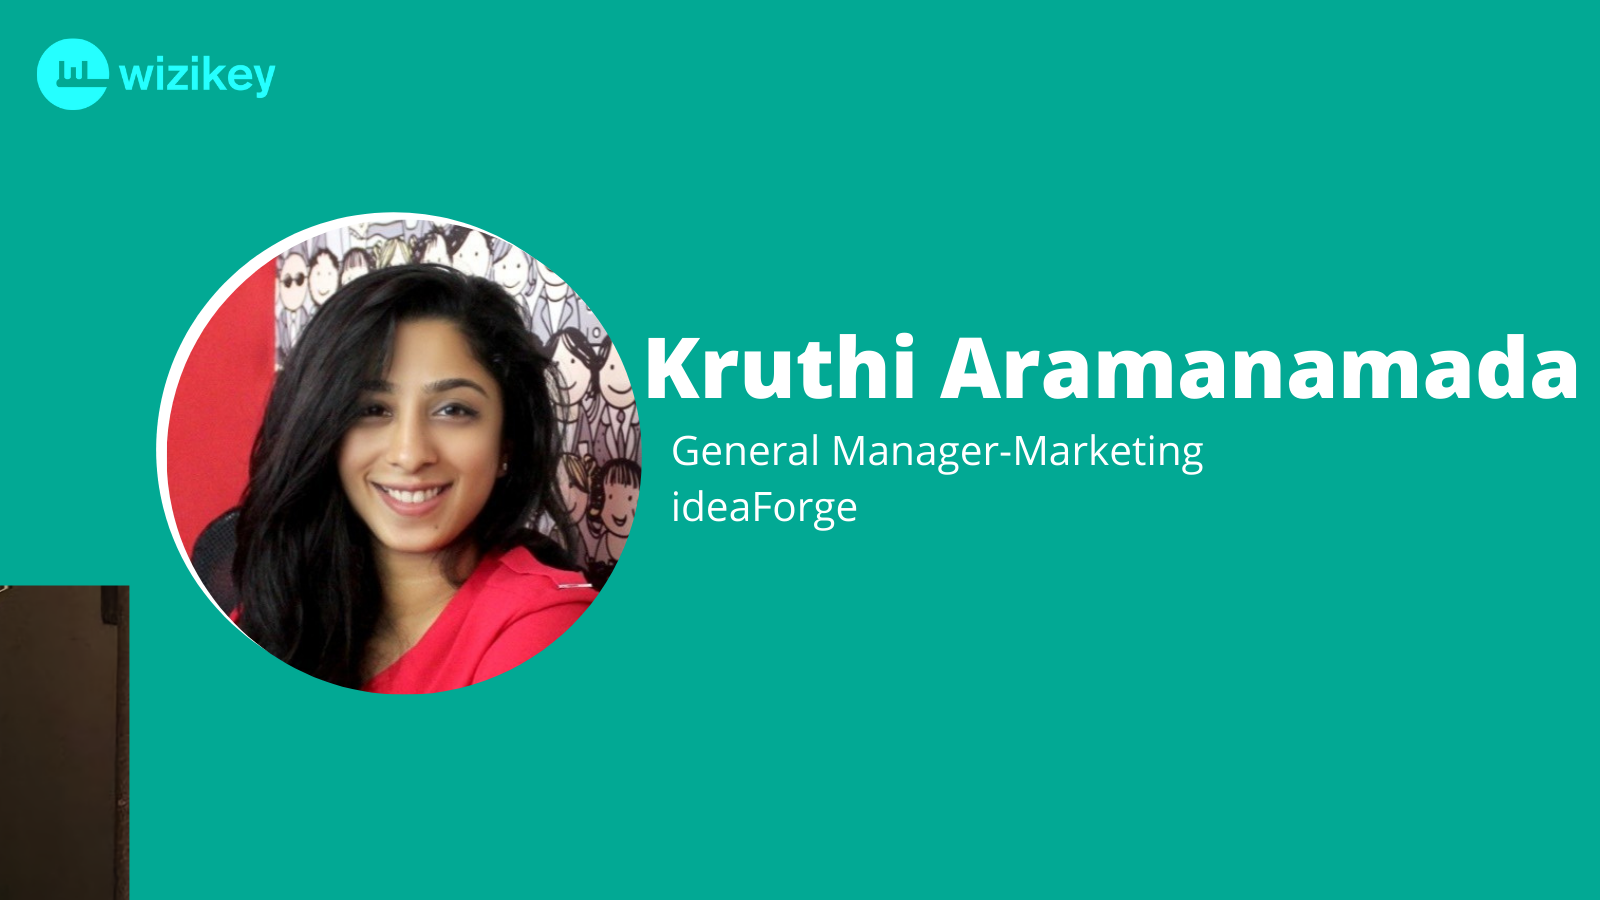 The future is for data-backed automated PR: Kruthi from ideaForge